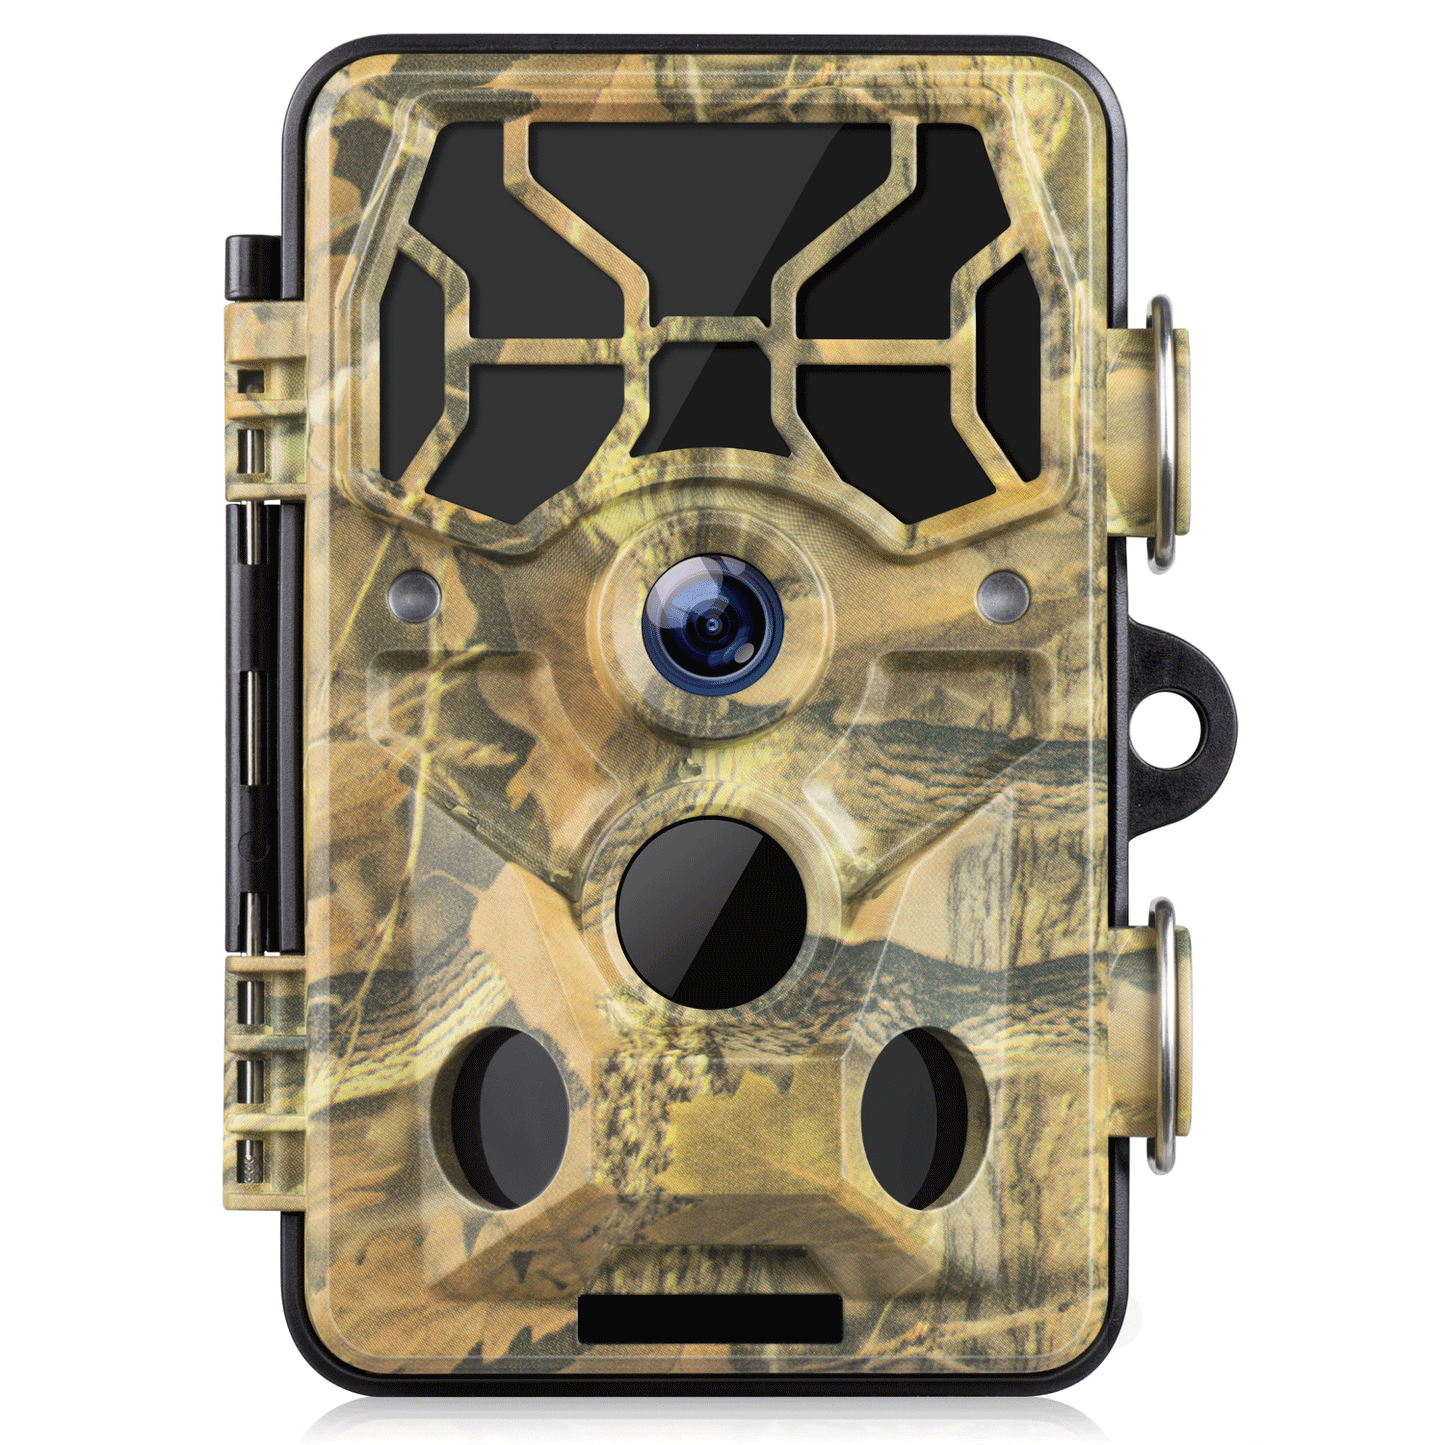 CAMPARK Trail Camera WiFi Hunting Deer Game Camera Night Vision Waterproof 1296P 20MP 3 Infrared Sensors Trail Cam for Outdoor Wildlife Monitoring